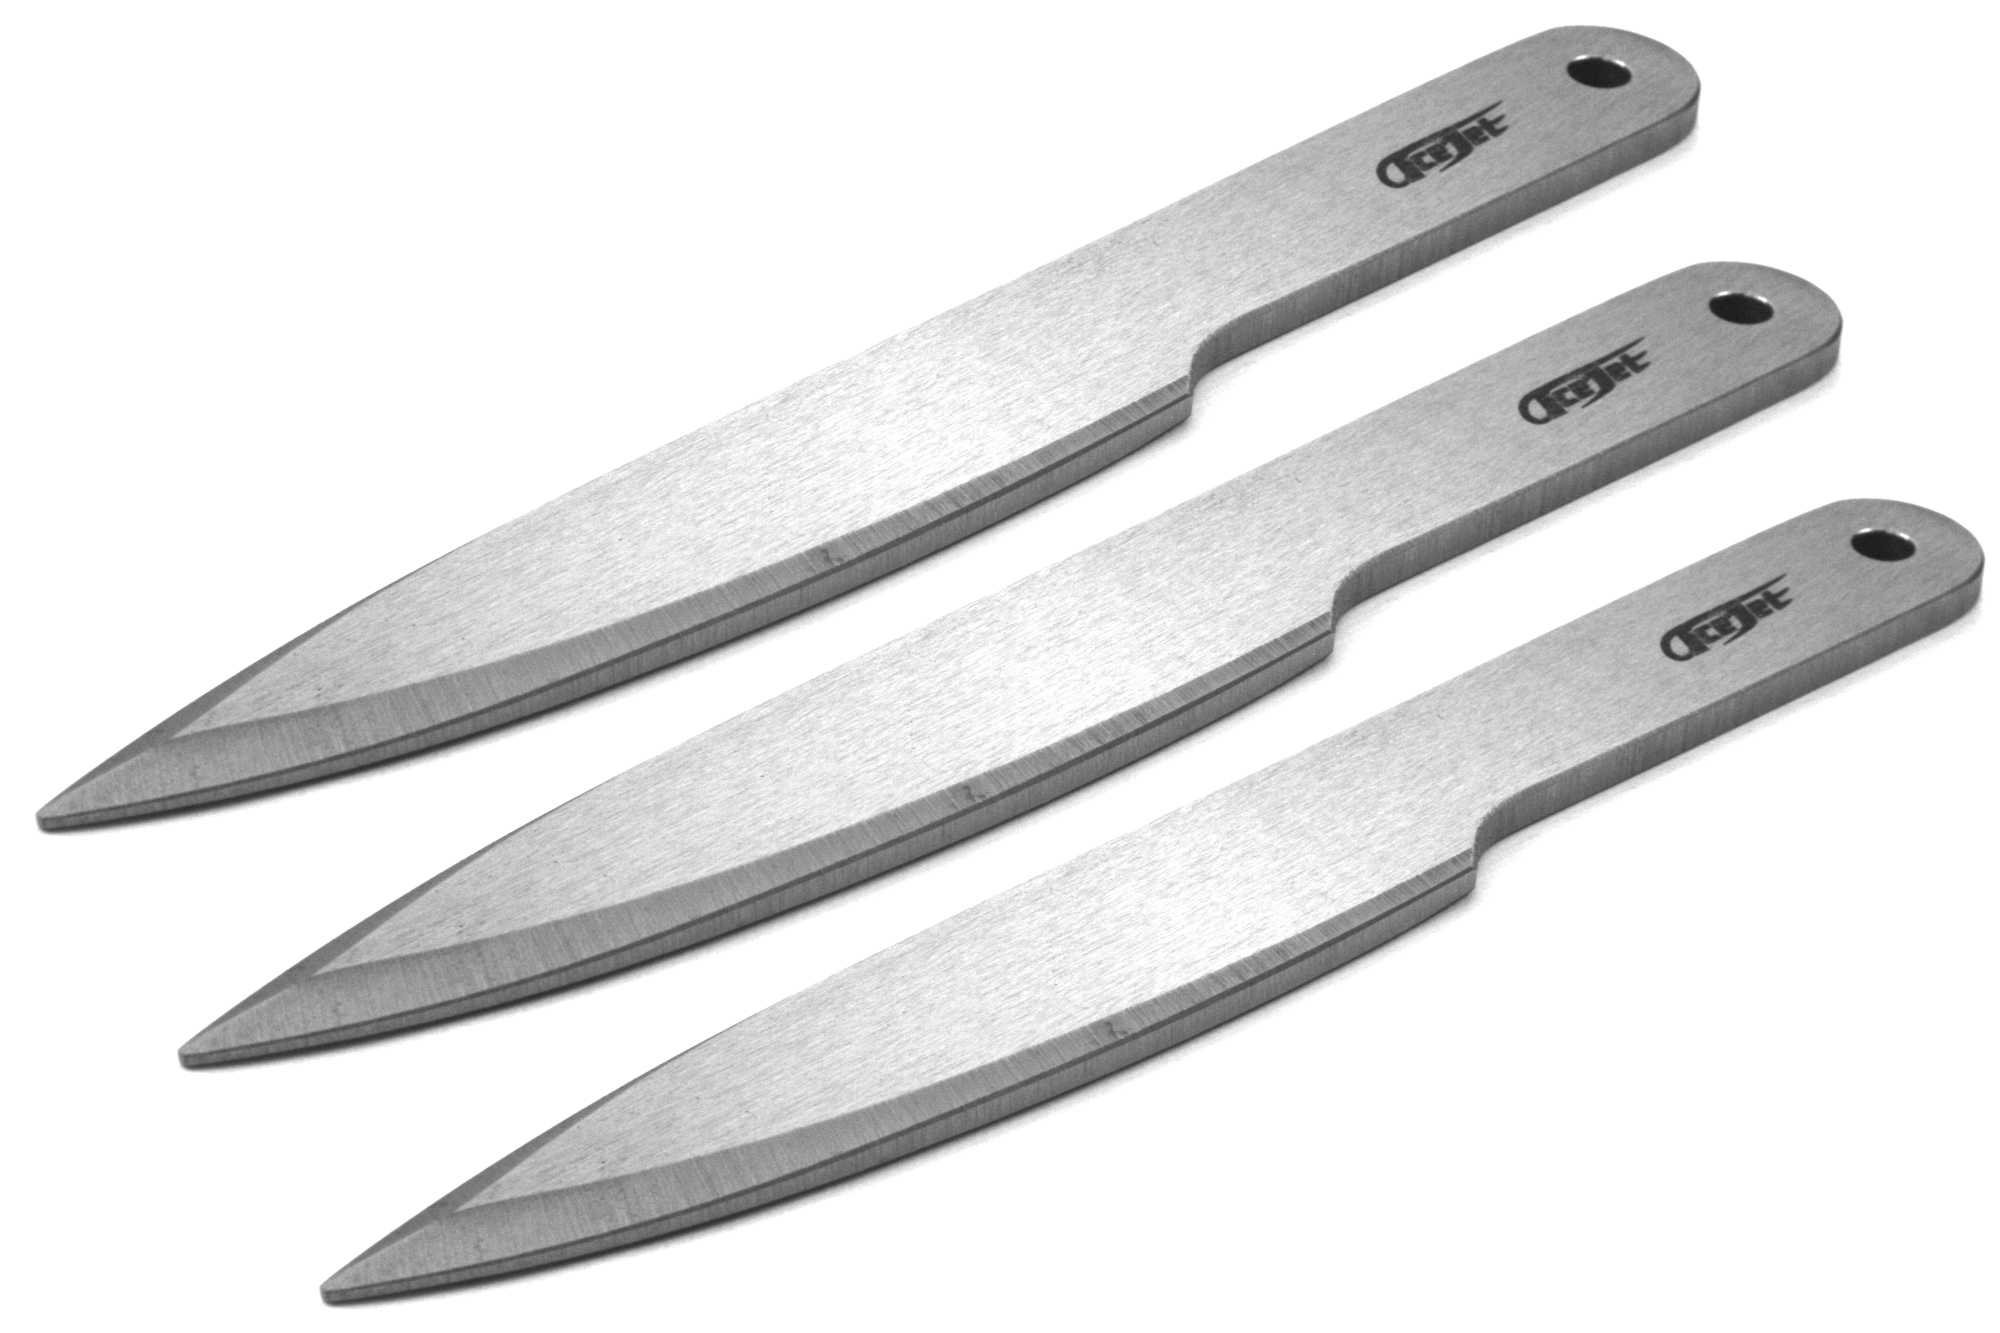 Appache D2 - 10" Throwing Knife Set of 3